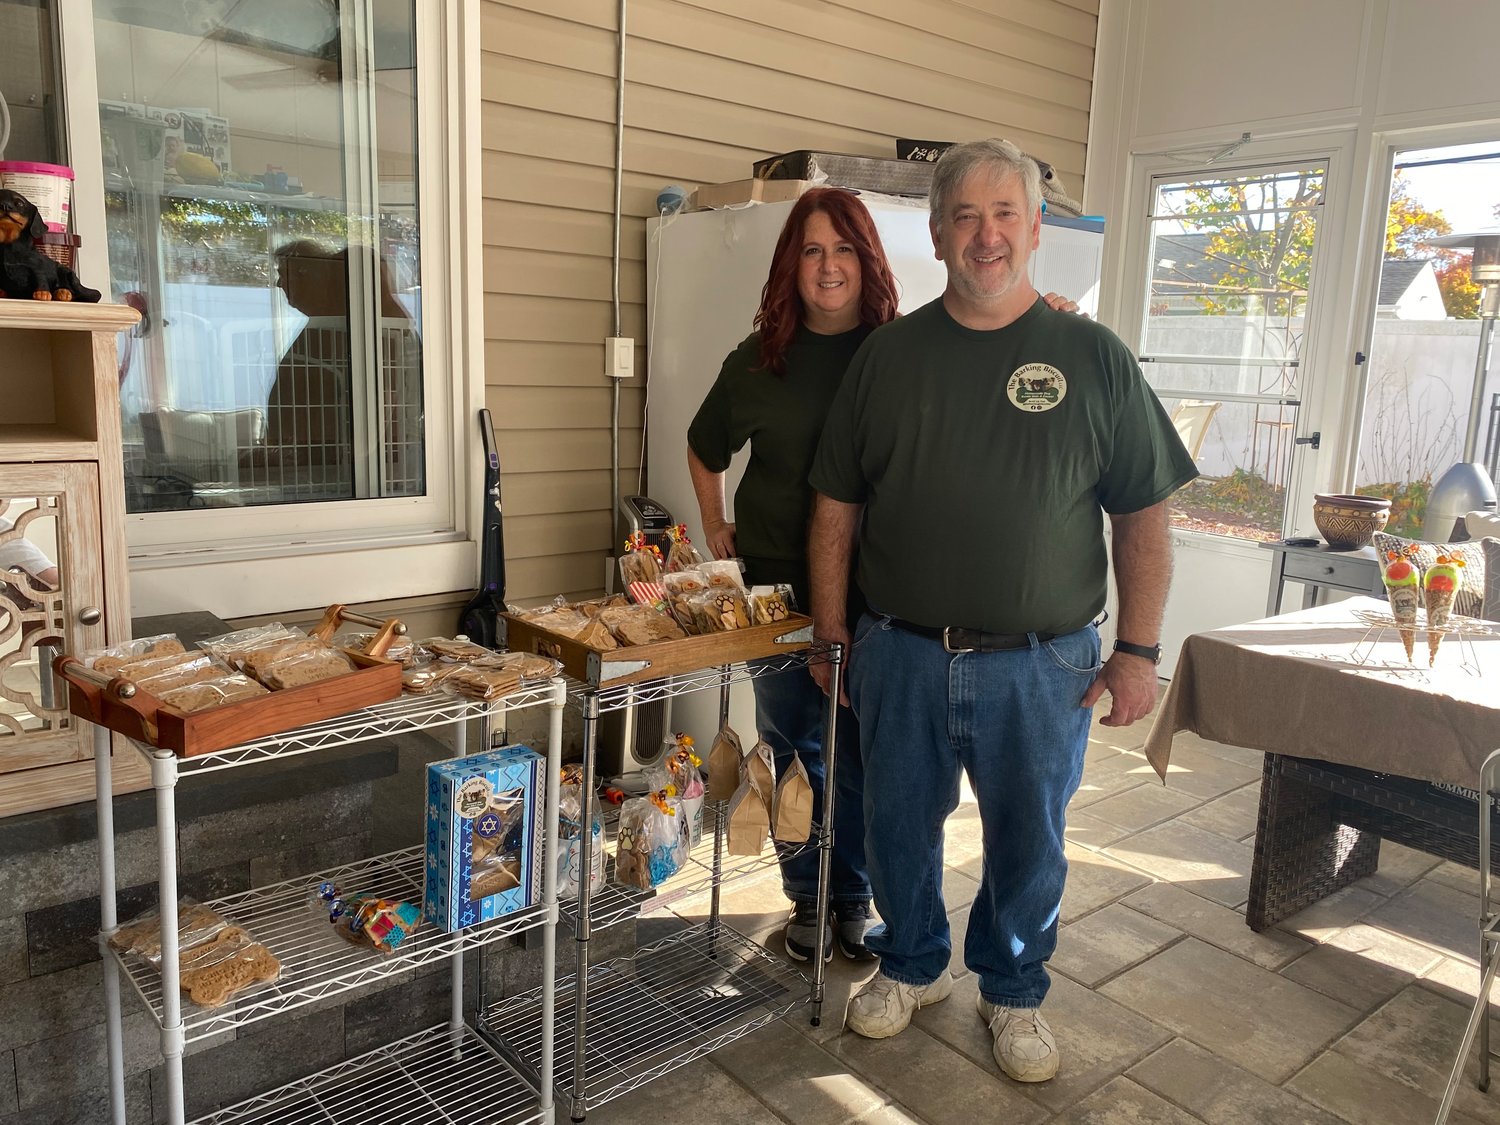 Ira and Hillary Reiter of Wantagh created the Barking Biscuit, which speciallzes in treats for pets.